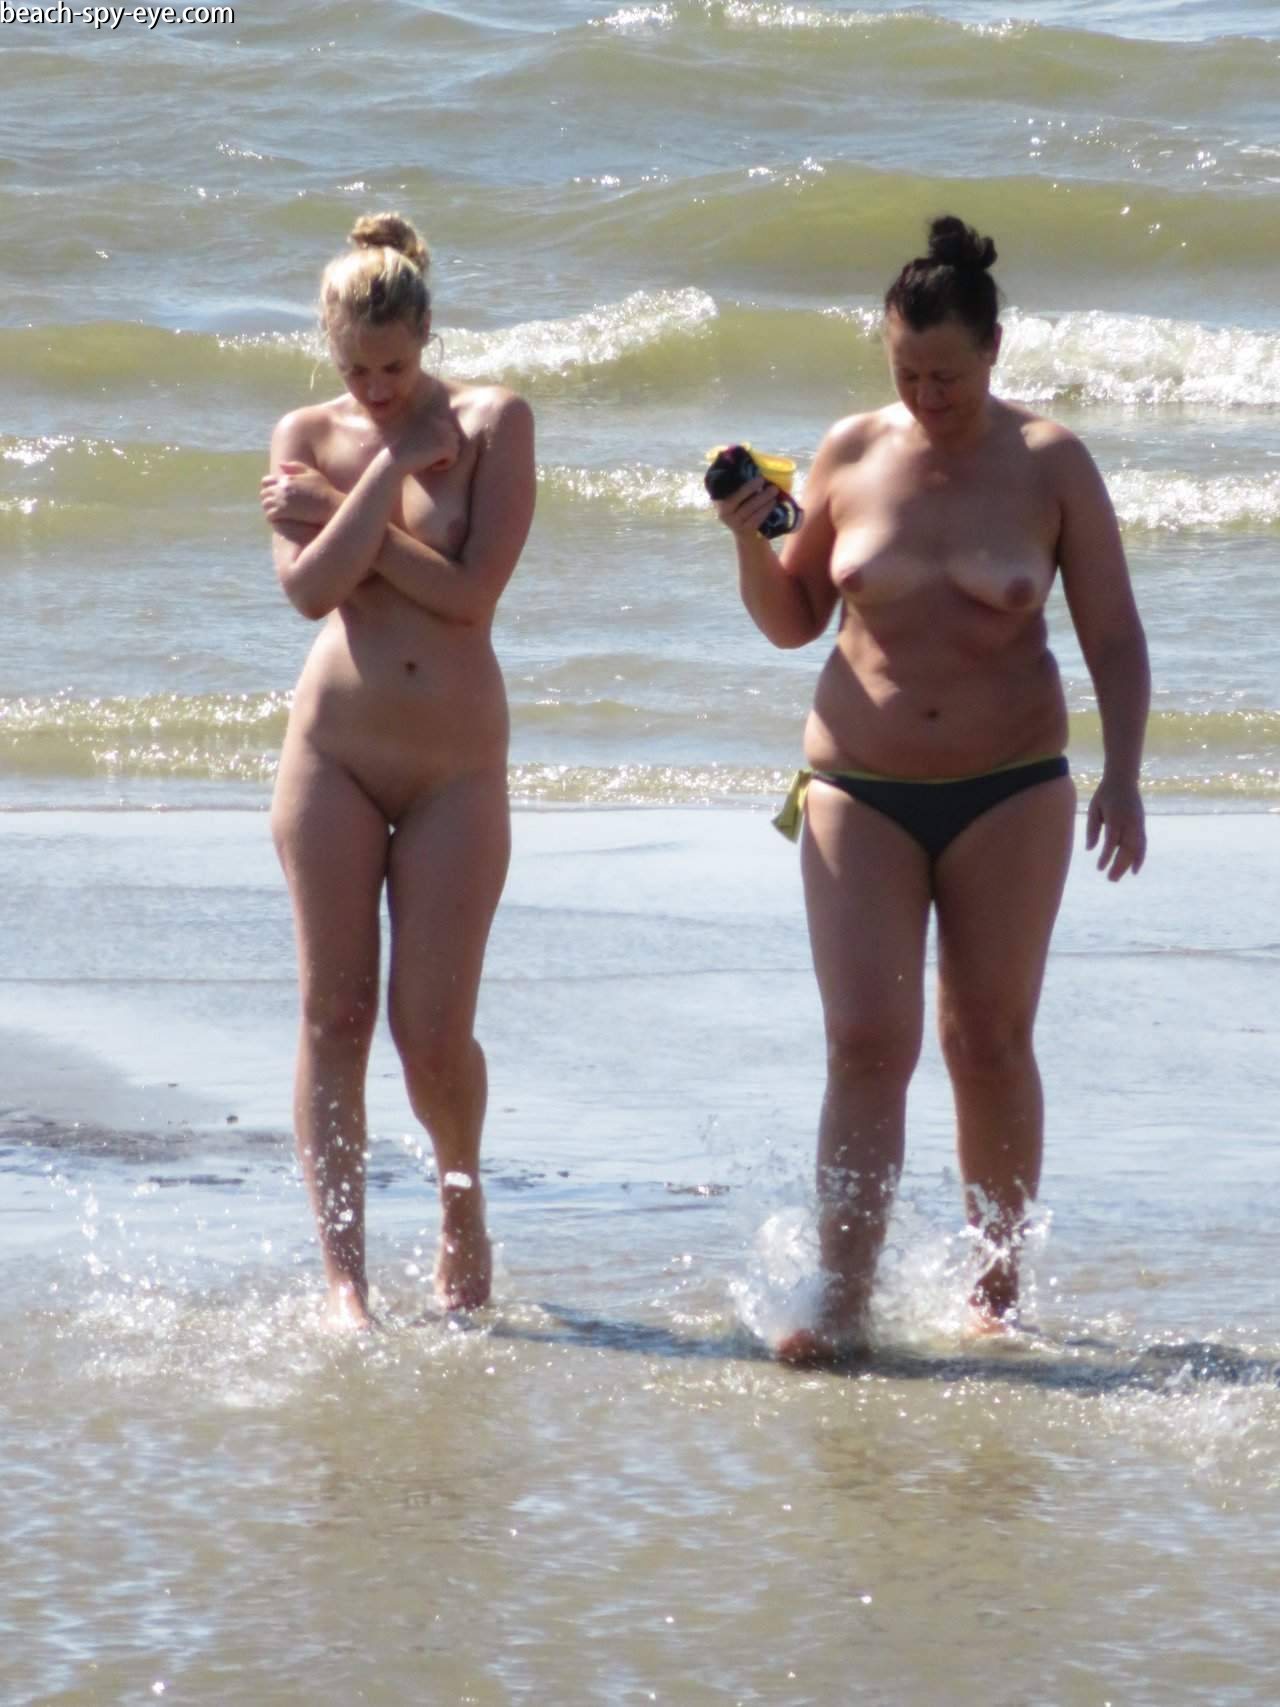 Nude Beaches Pics Undisguised superior to before beaches - time.. View 6